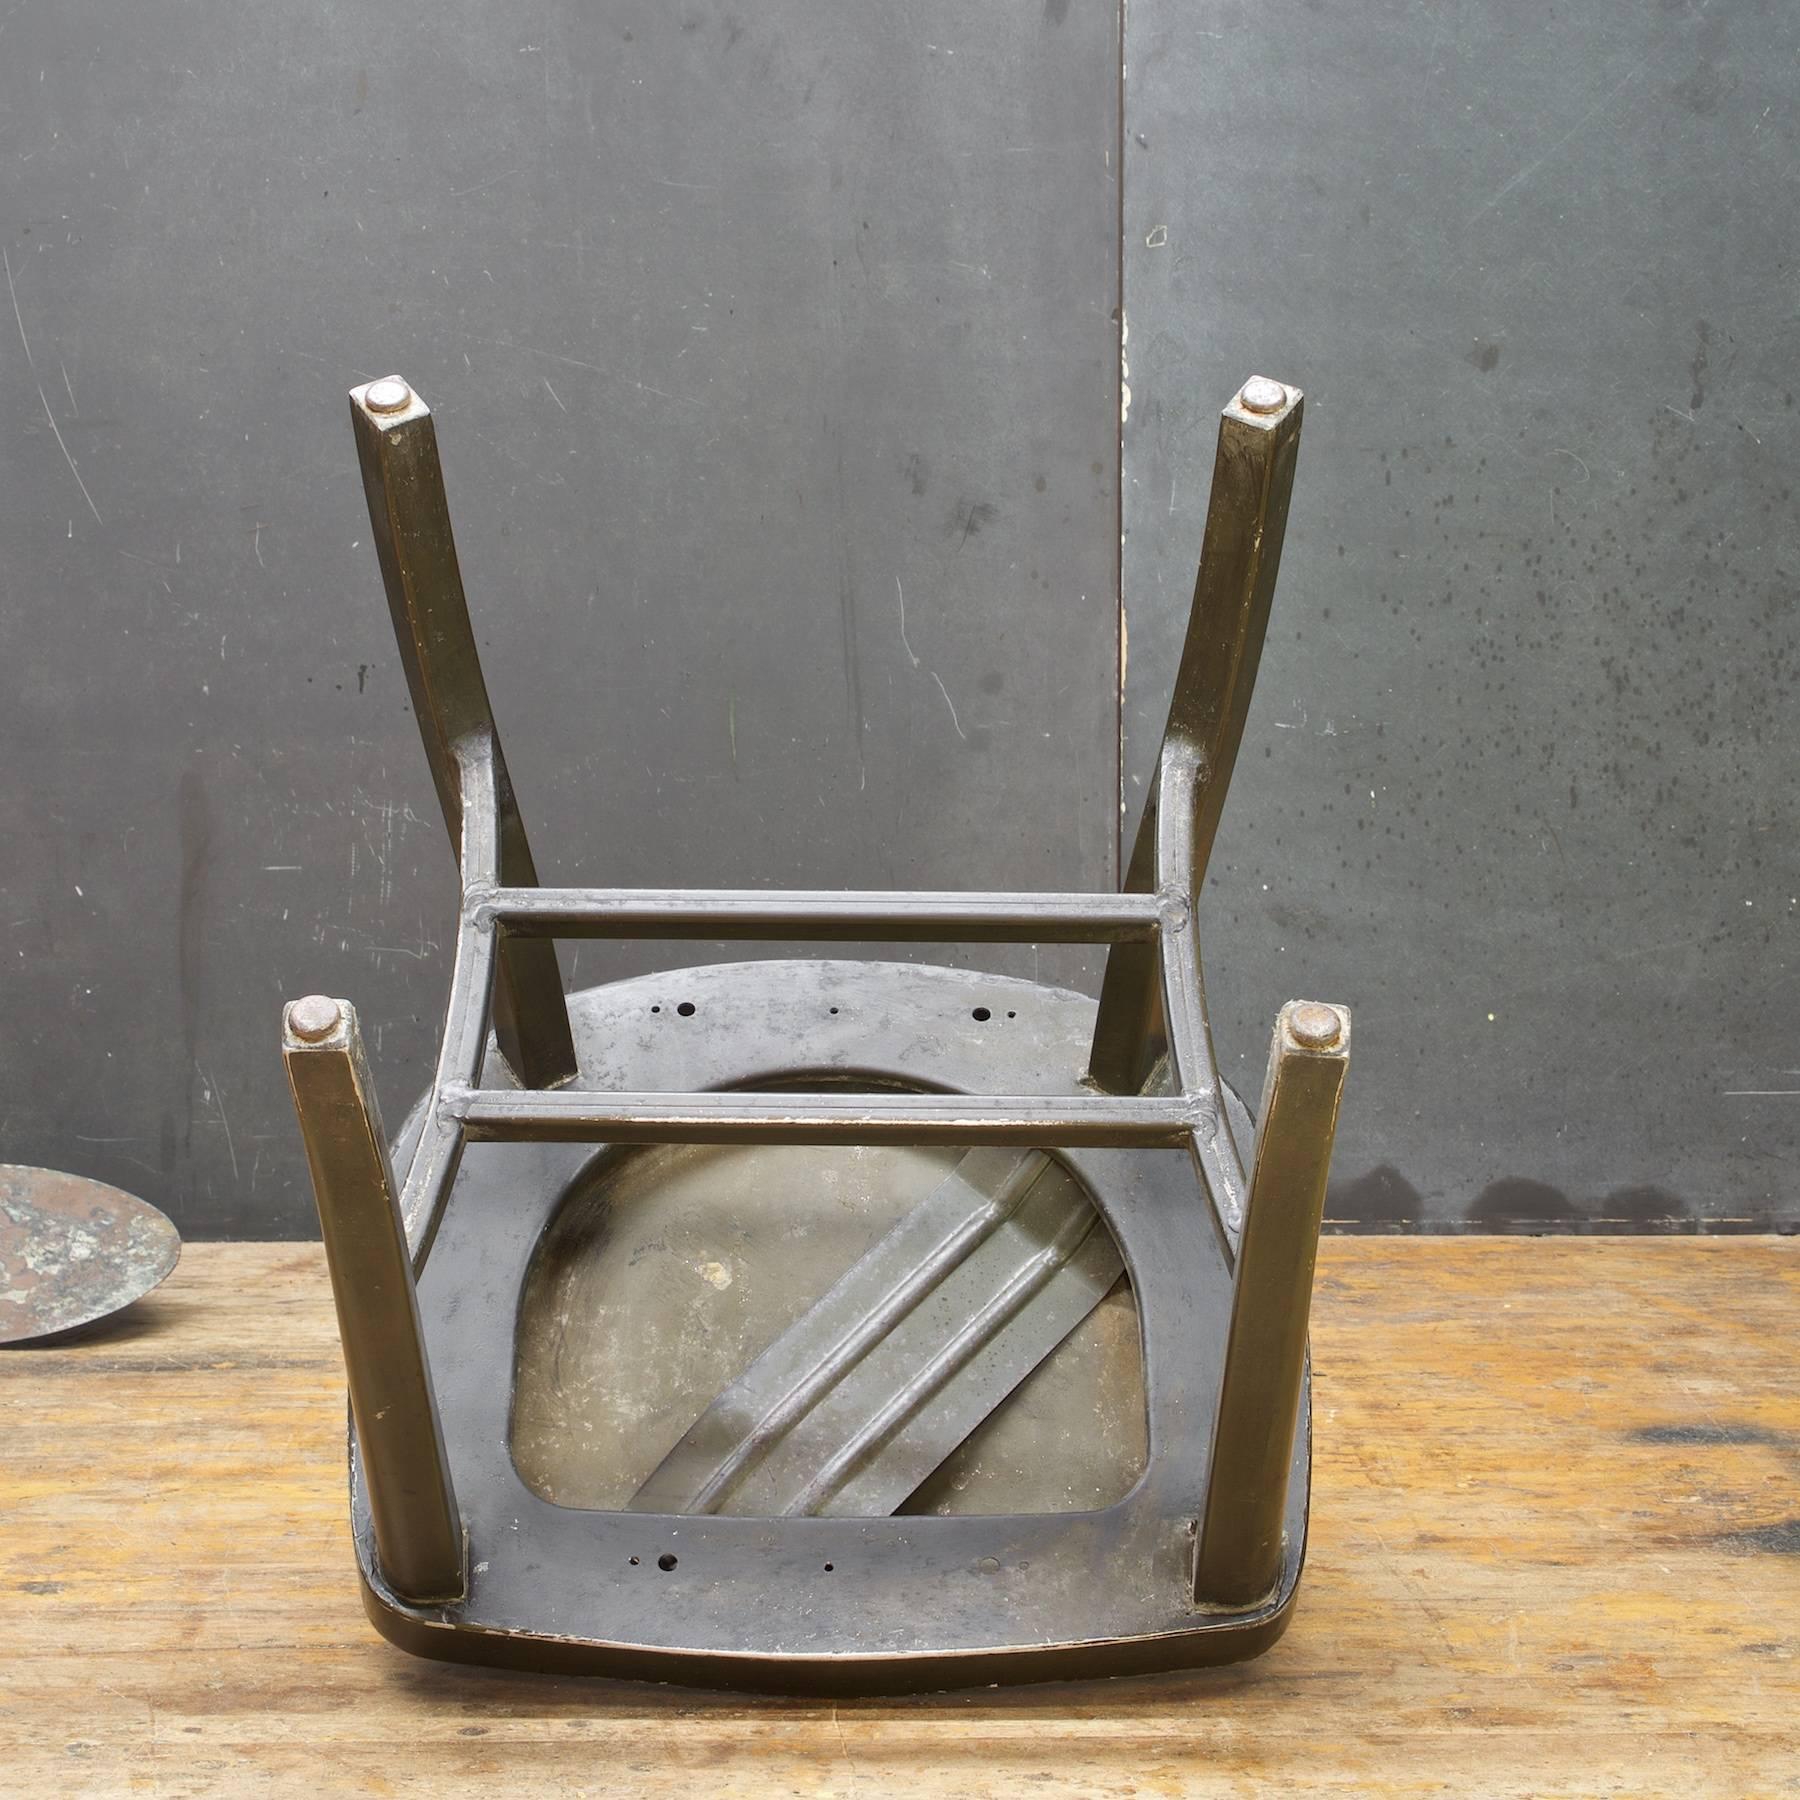 Machine-Made 1930s US Barracks Metal Early Goodform Chair by General Fireproofing